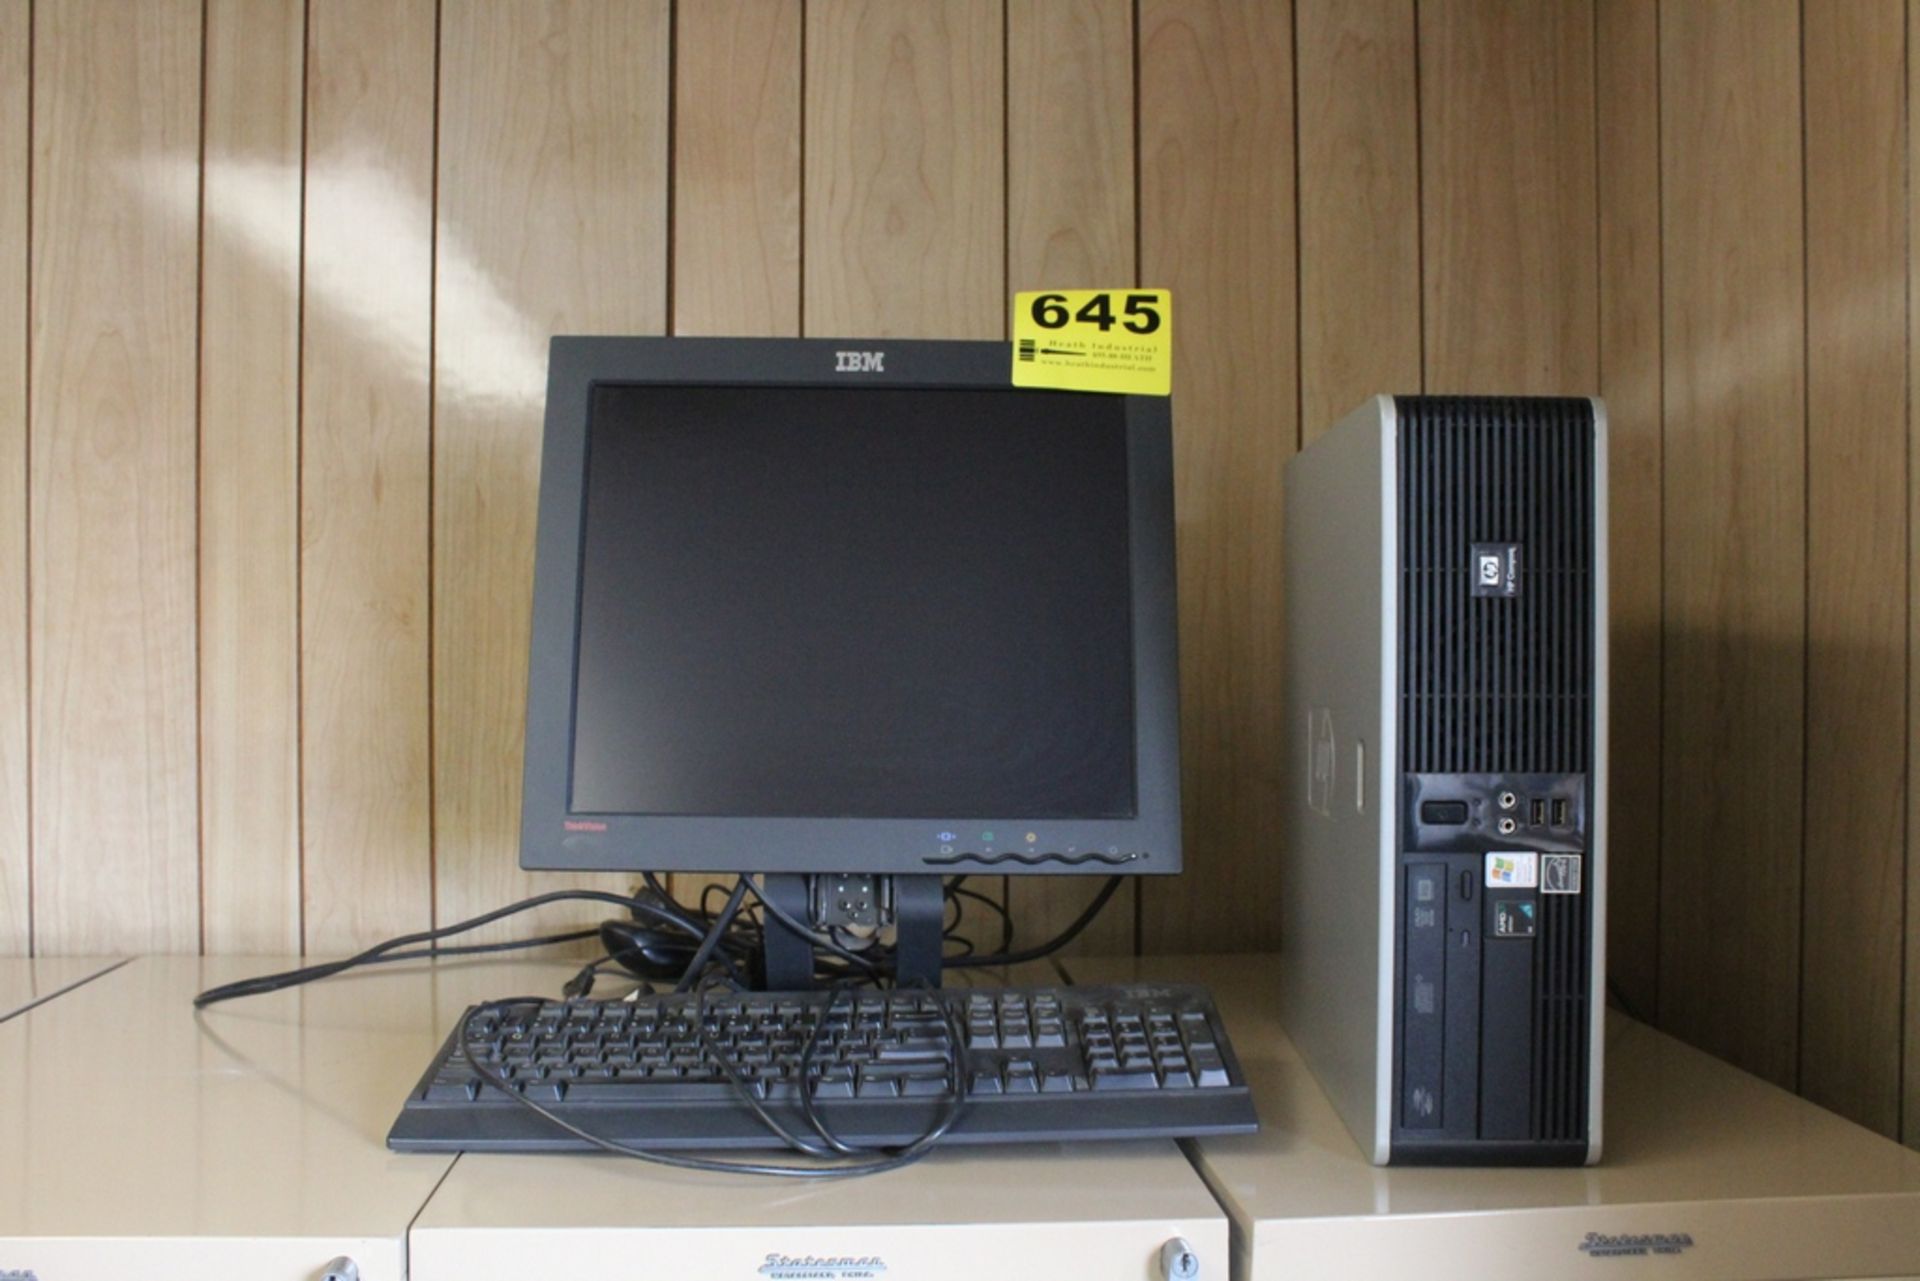 HP DESKTOP COMPUTER WITH MONITOR, KEYBOARD, AND MOUSE